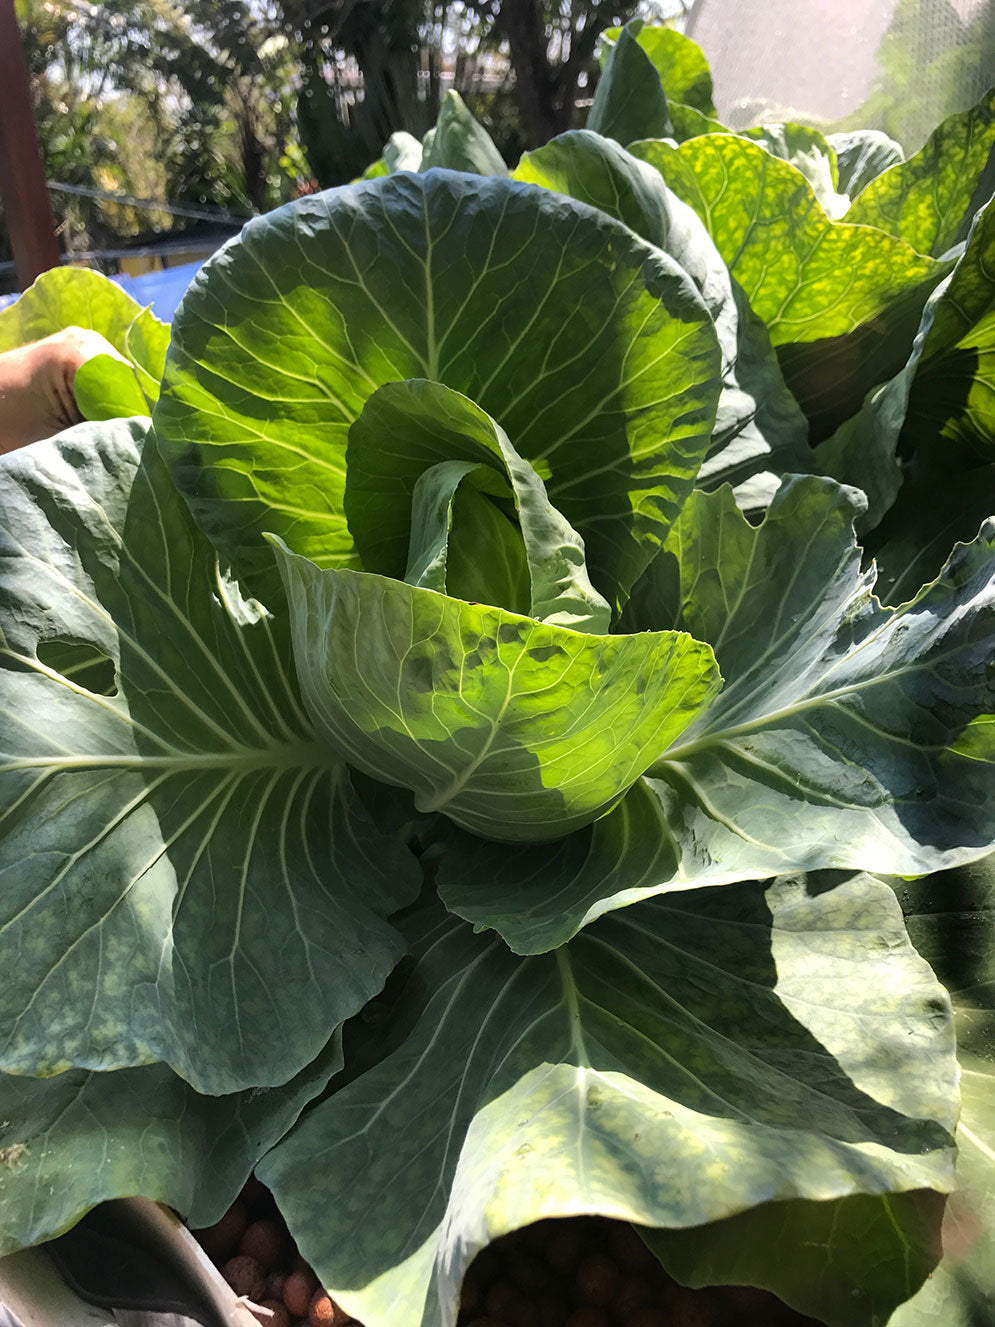 Cabbage in our Aquaponics